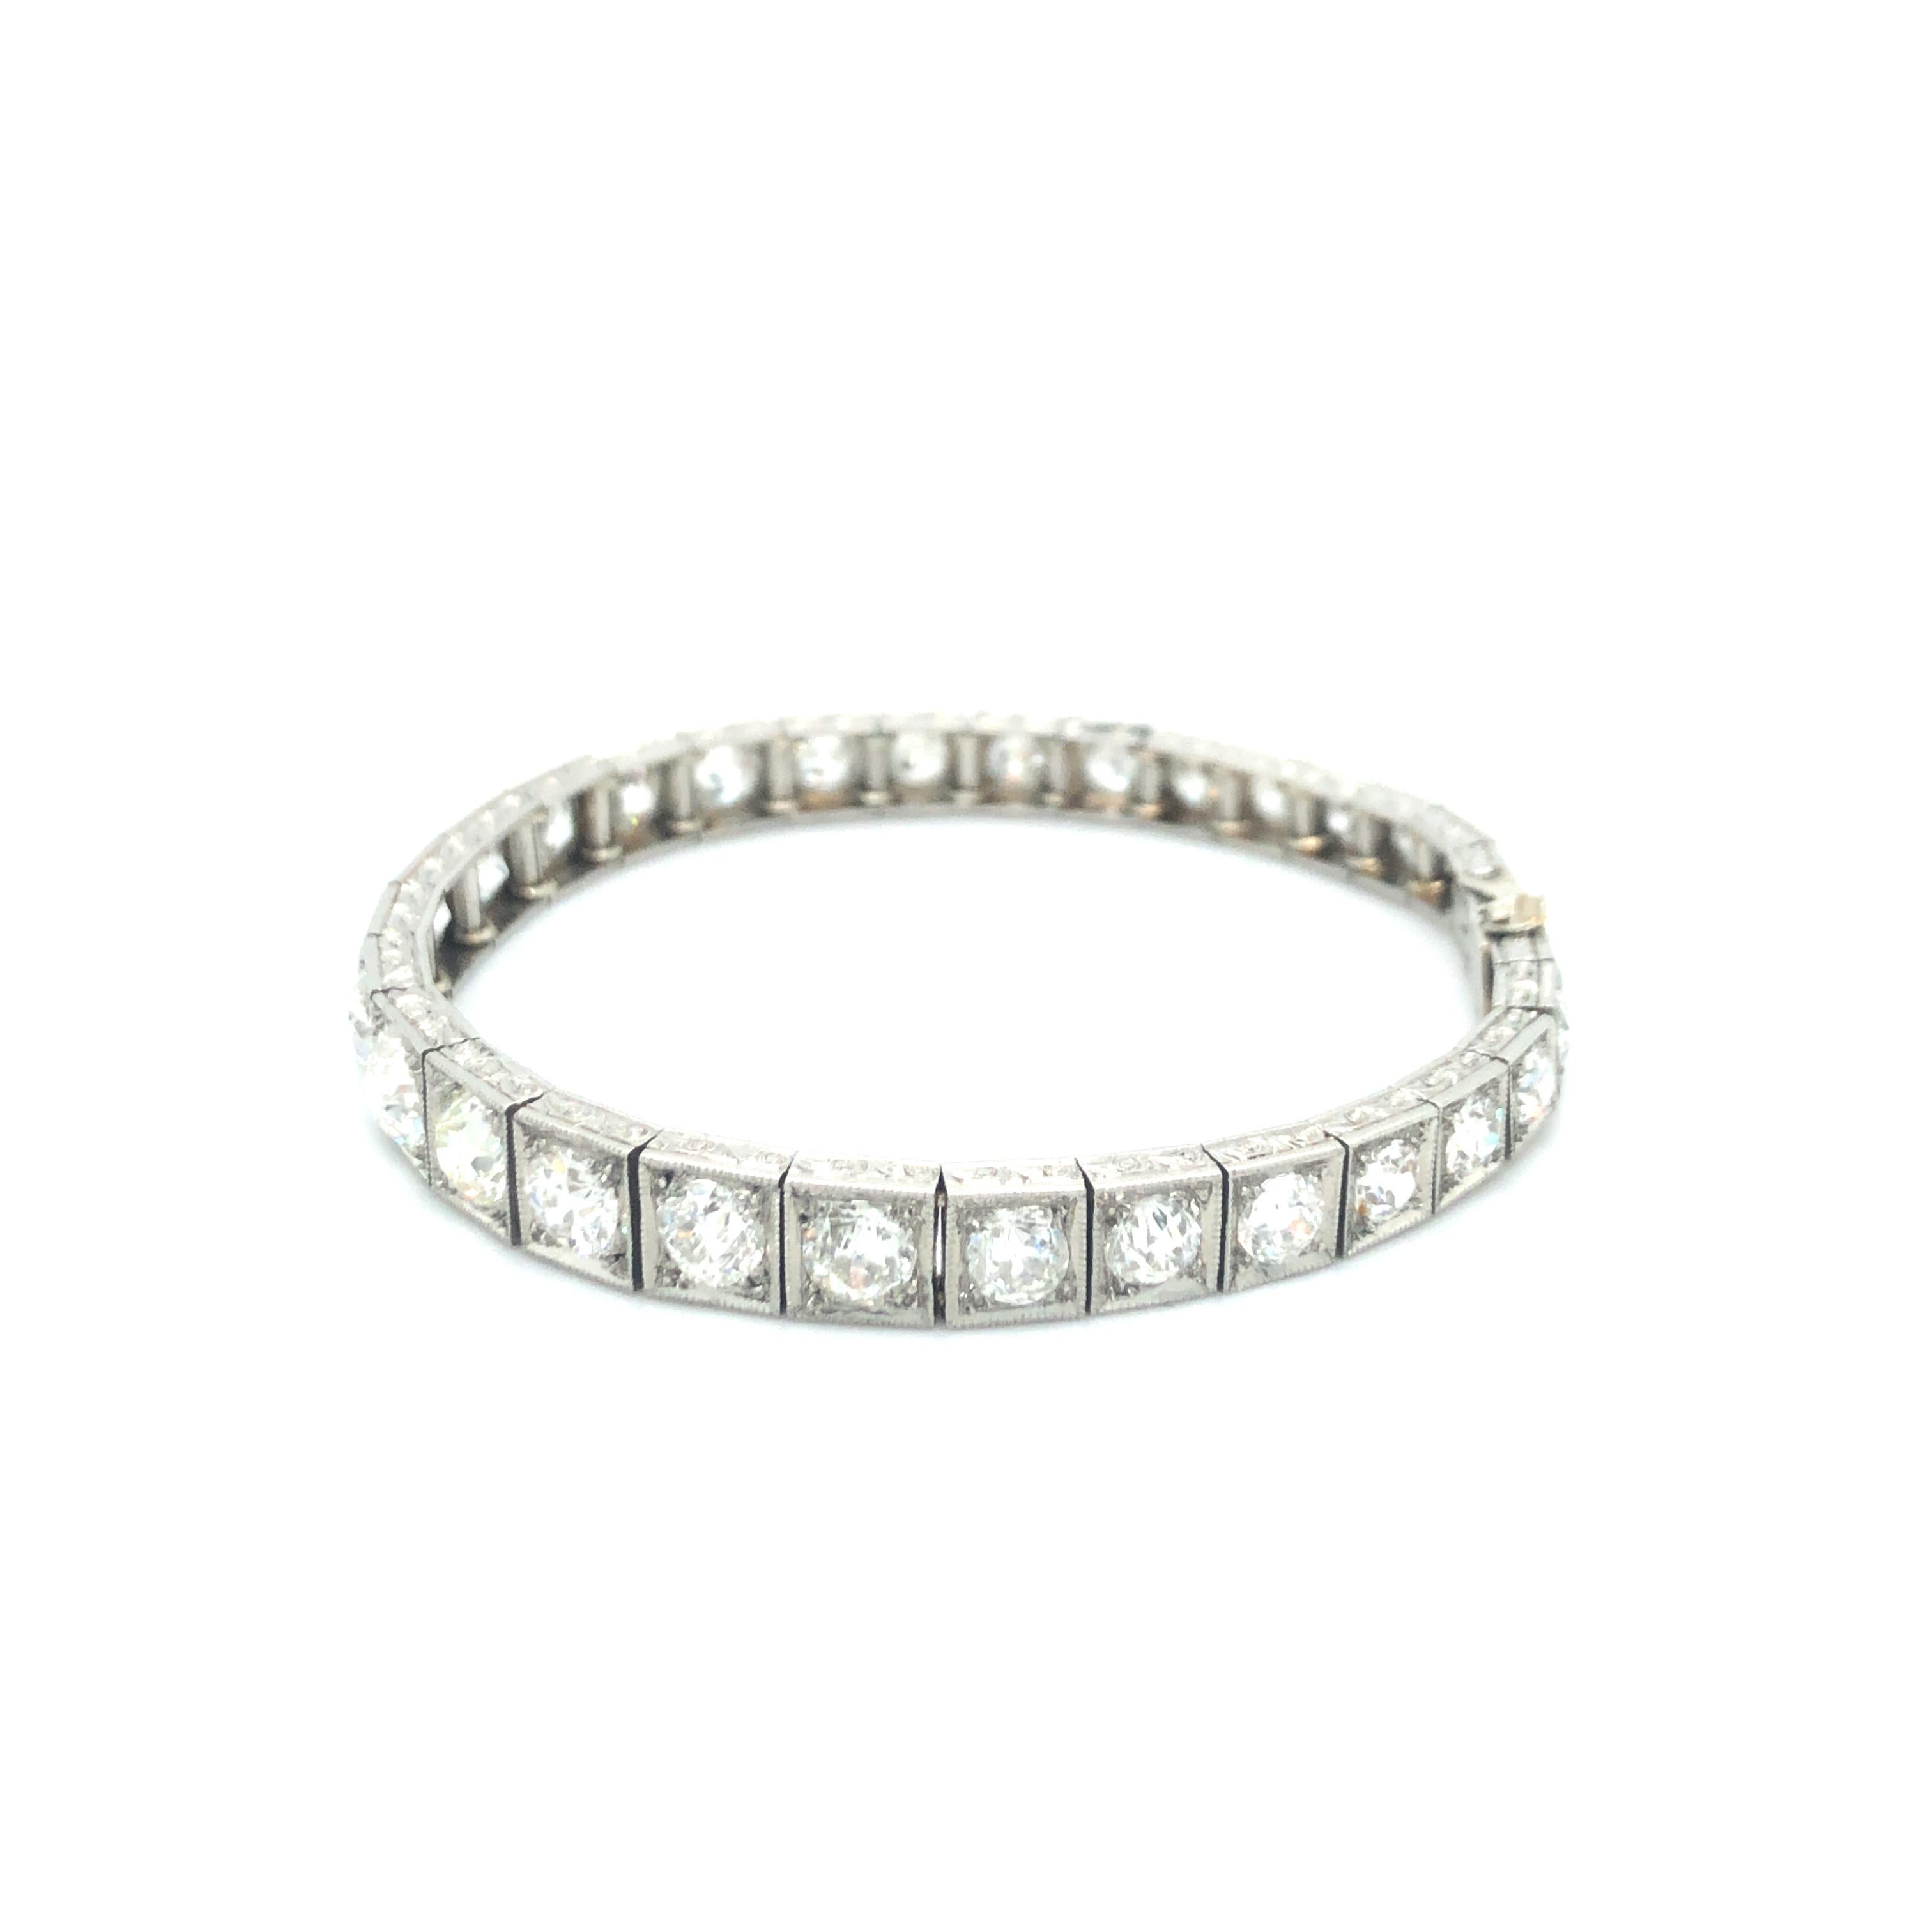 This beautiful Art Deco bracelet is handcrafted in platinum 950 and set with 31 Old European cut diamonds of F/G colour and si clarity, total weight approximately 7.50 carats.
The diamonds are carefully set in square-shaped and delicately engraved